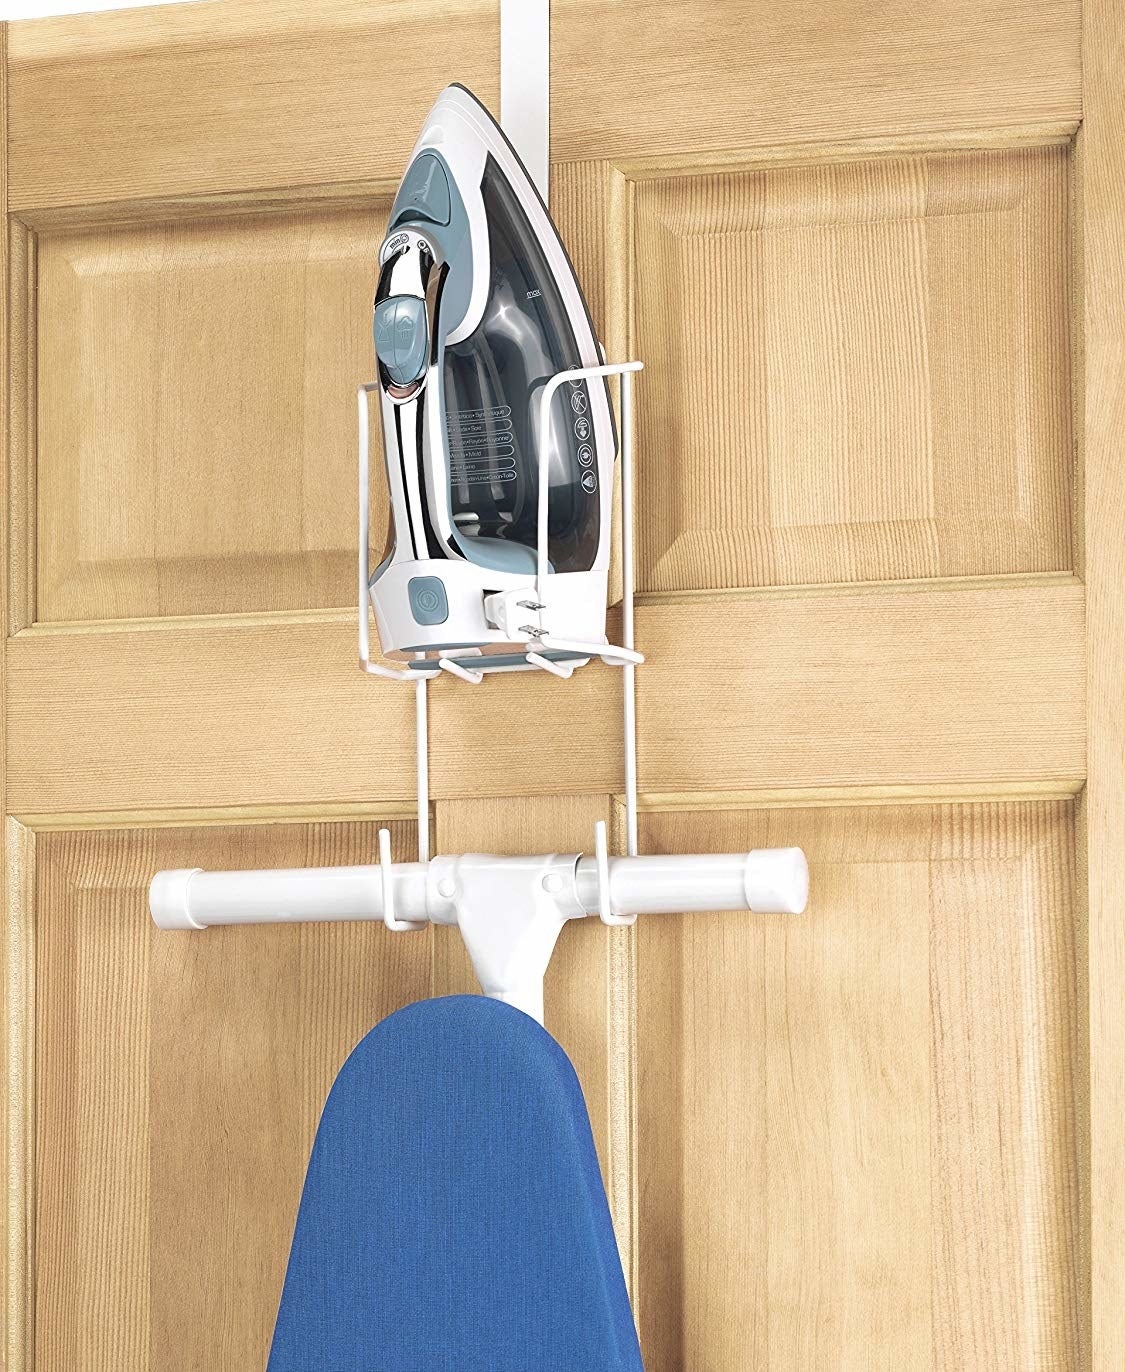 A white caddy hanging over a door holding an ironing board and an iron